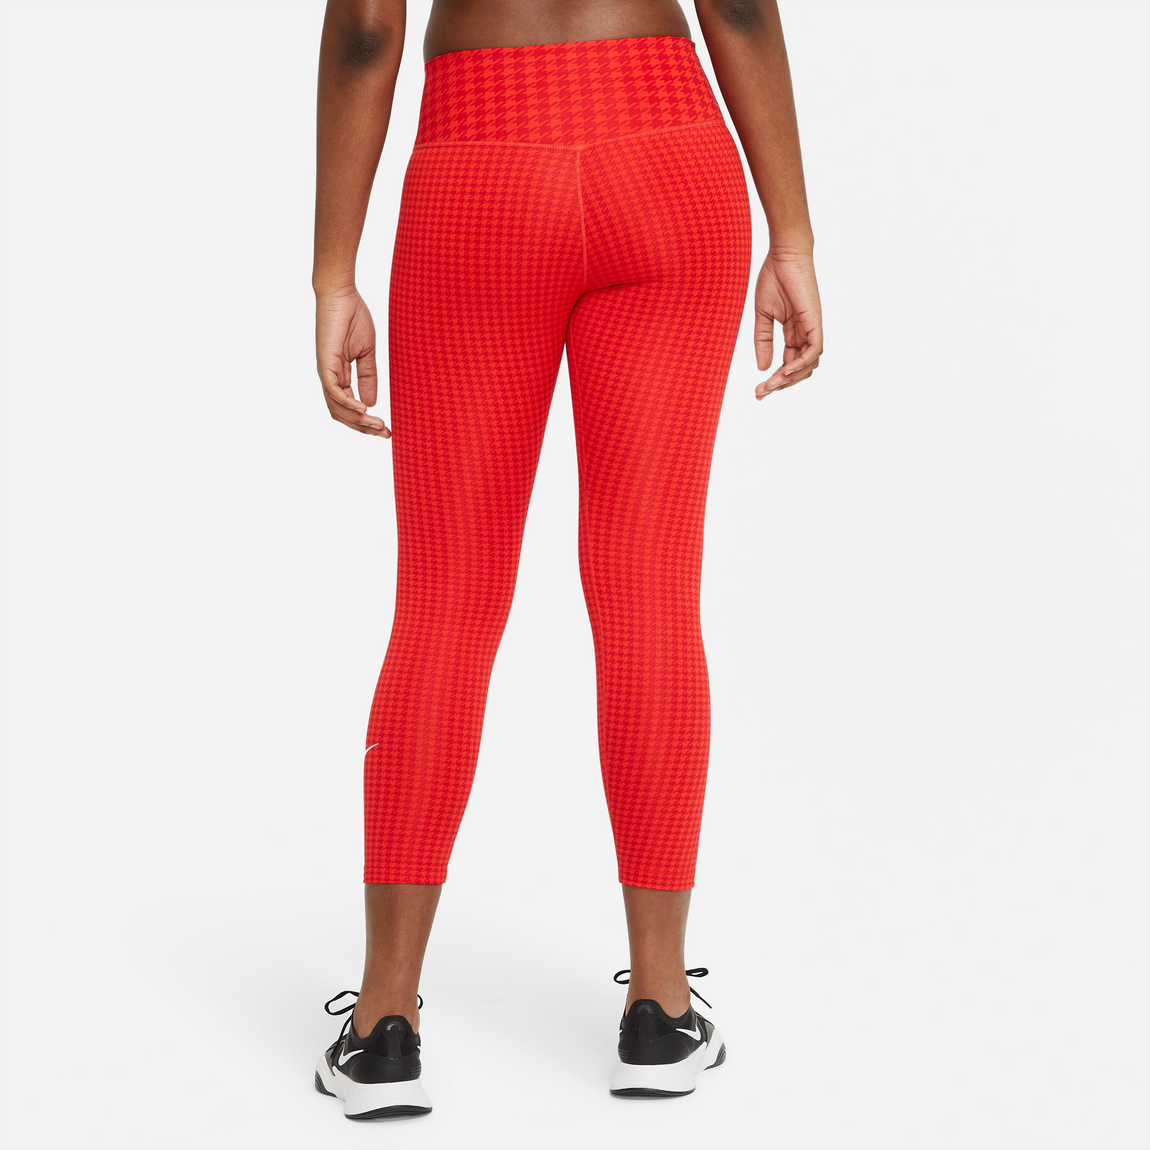 Buy Nike Women's One Icon Clash Ankle Leggings CV9028-601 Size L at